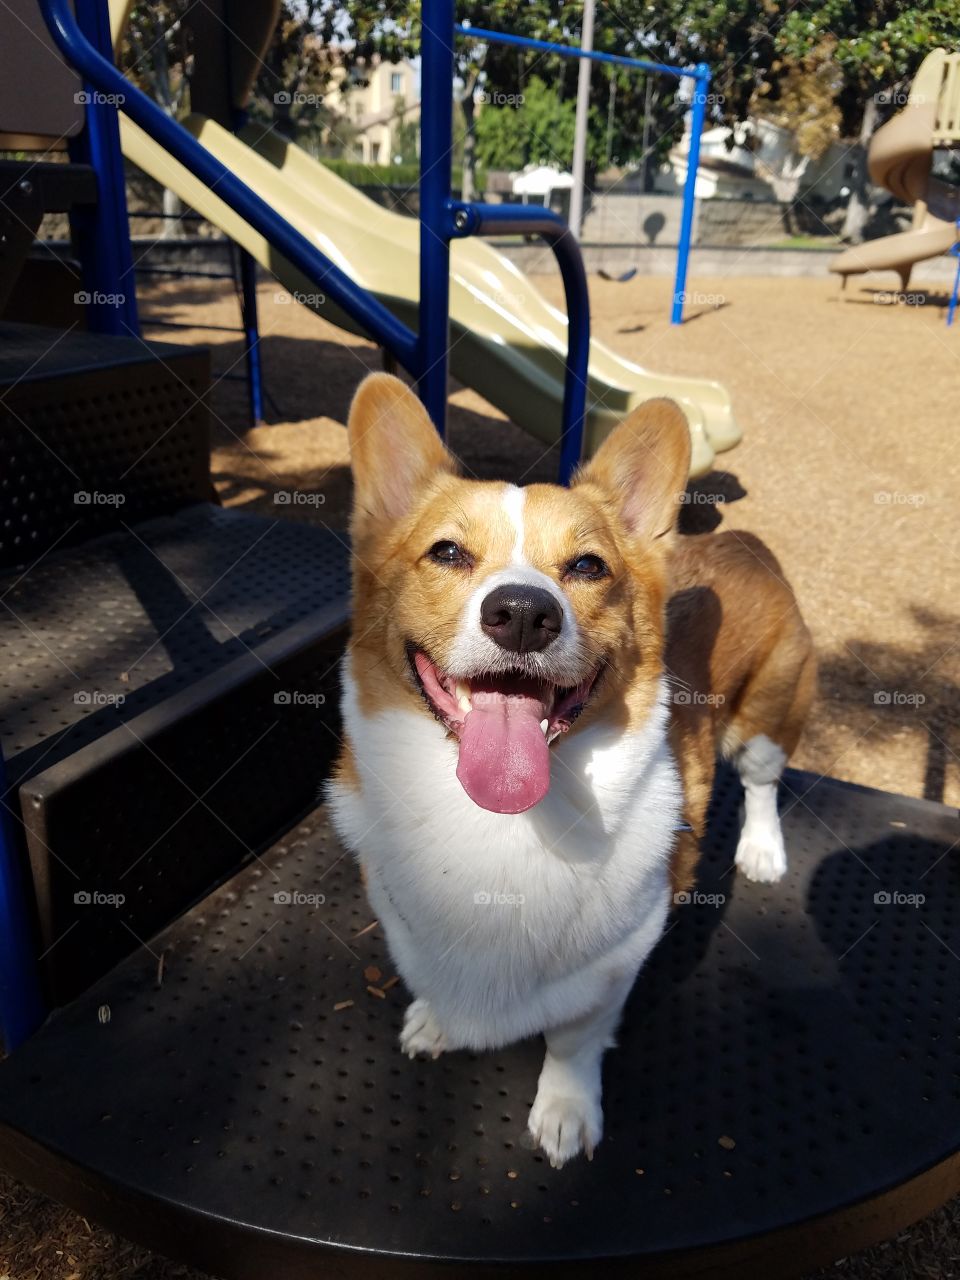 Link loves to play at the park